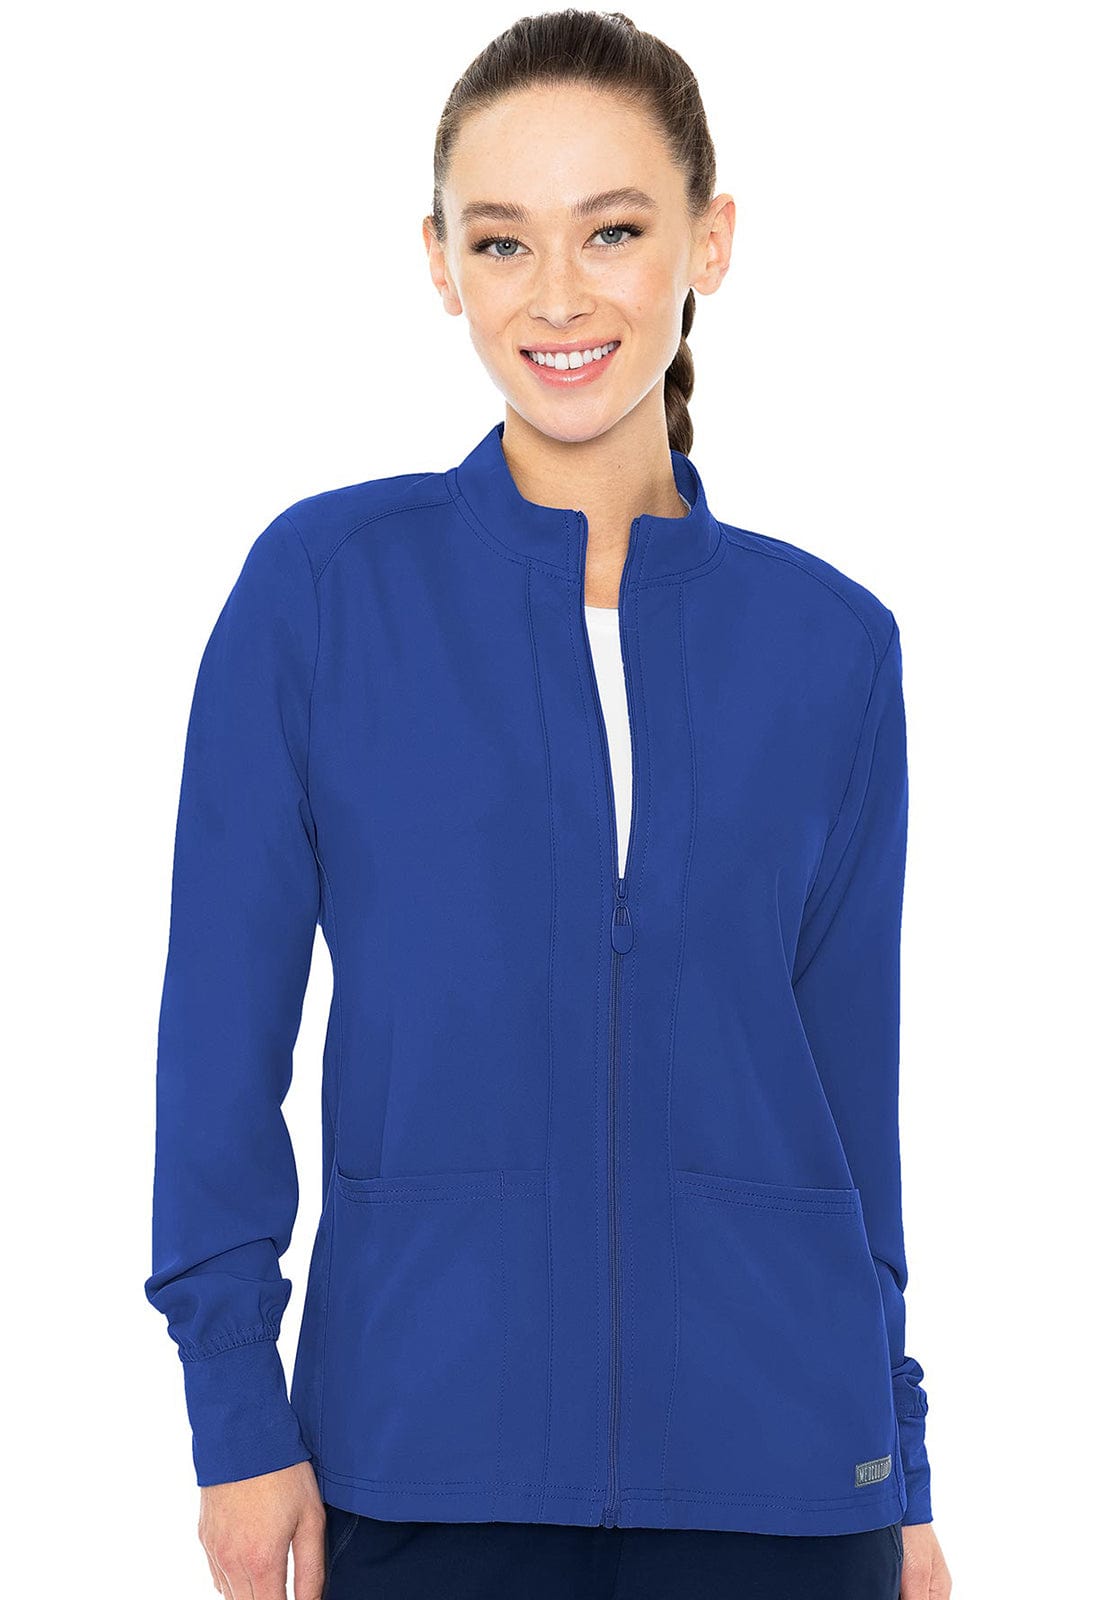 Med Couture MC Insight Royal / XS MC Insight  Zip Front Warm-Up Scrub Jacket With Shoulder Yokes MC2660